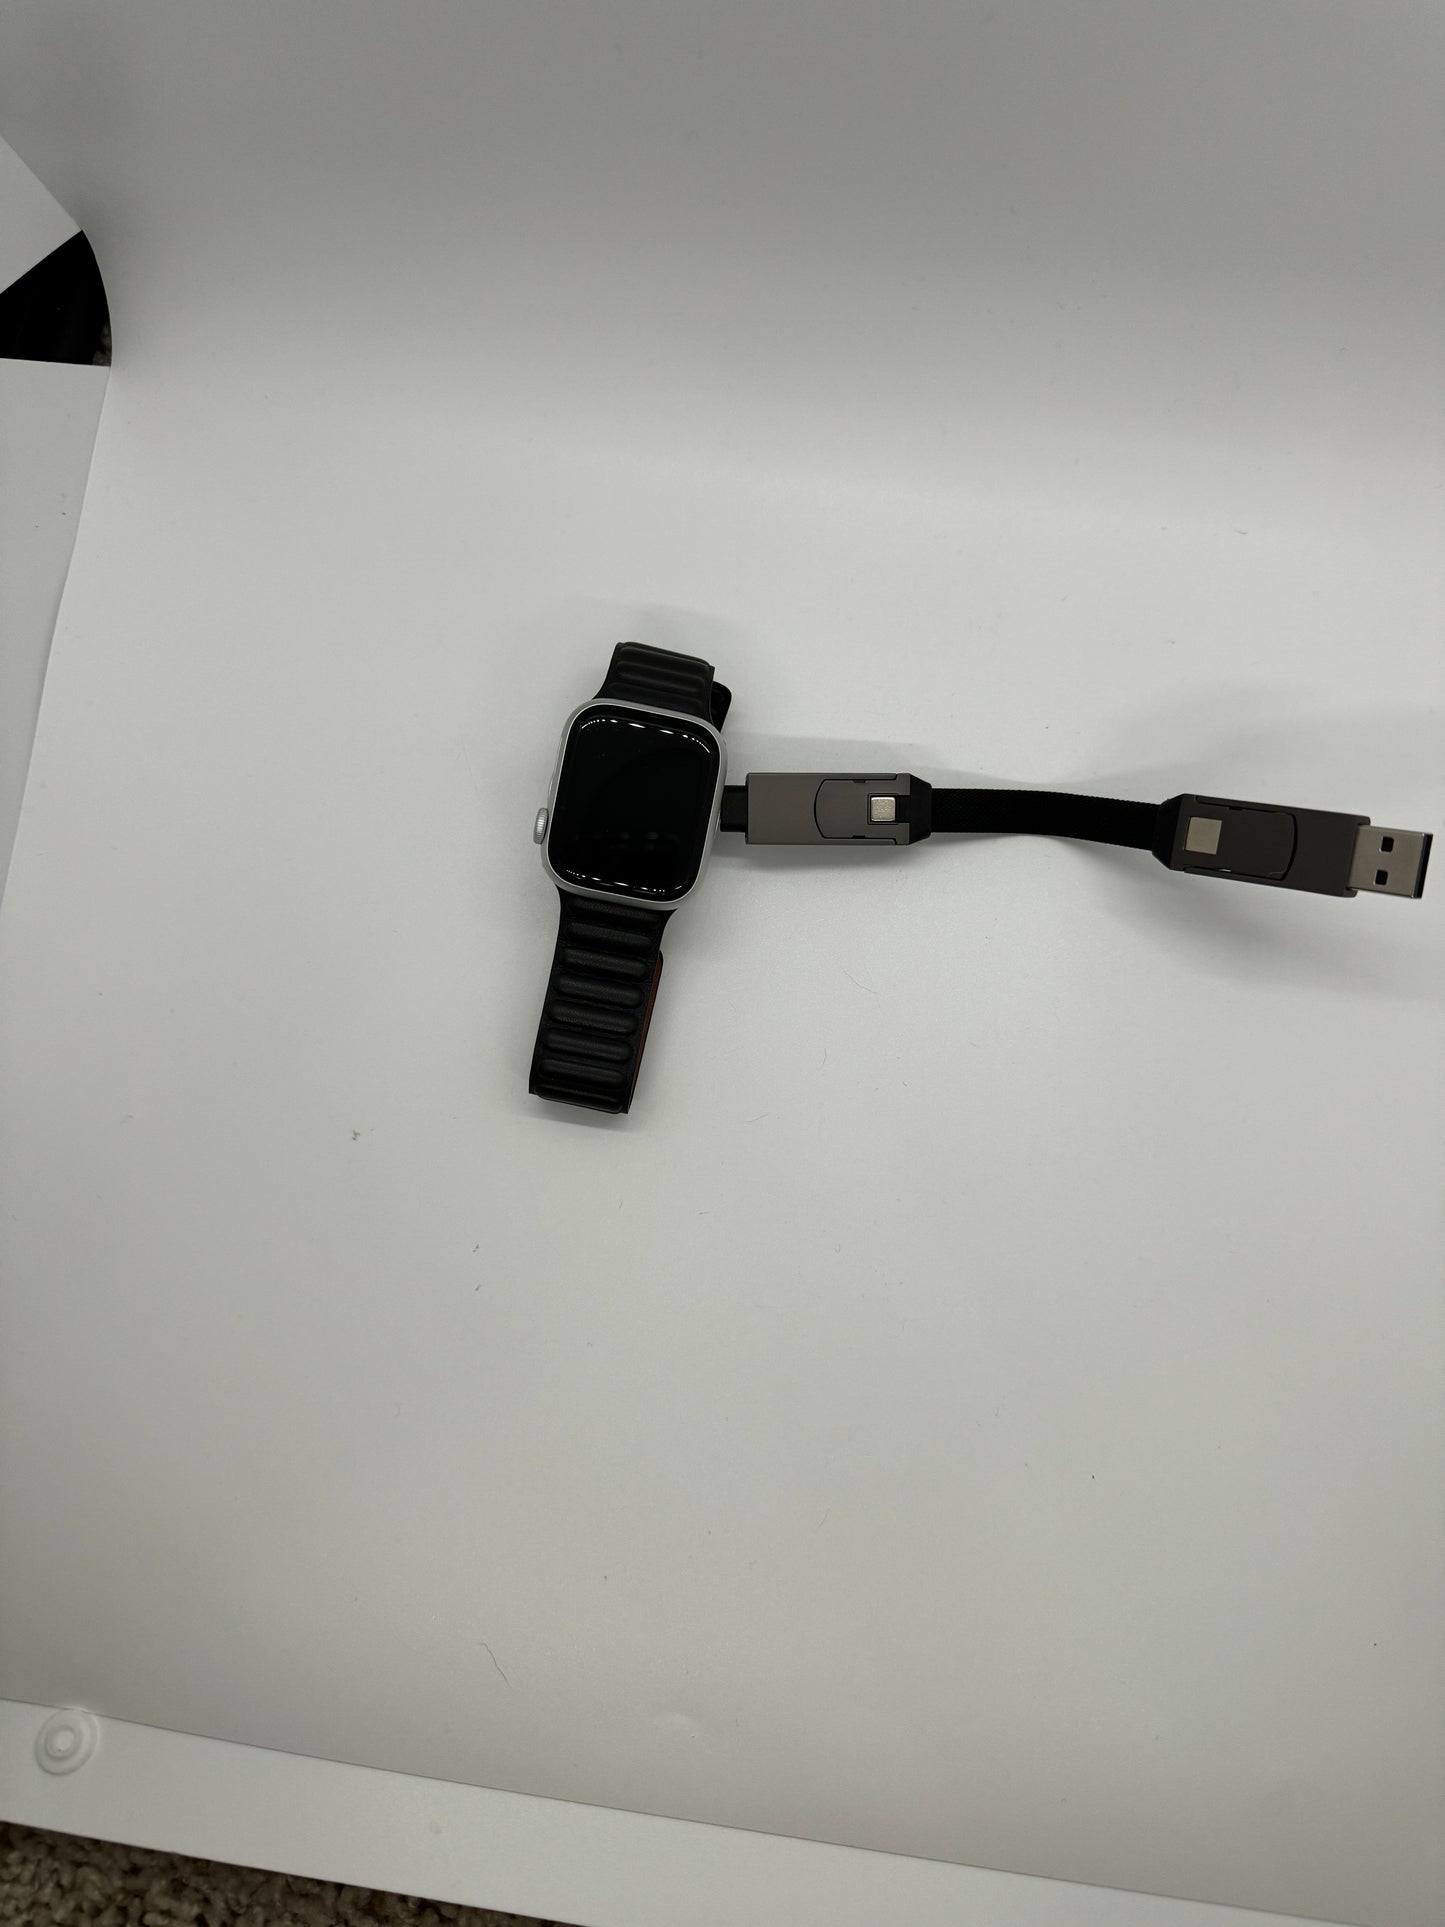 Be My AI: The picture shows a smartwatch and a USB cable on a white surface. The smartwatch has a black band and a rectangular face with rounded corners. The screen of the smartwatch is black and it is placed on the left side of the image. The USB cable is on the right side of the image and has a black cord. The USB connectors are silver and one end of the cable is a standard USB, while the other end seems to be a special connector, possibly for the smartwatch. The background is plain white and there is a s